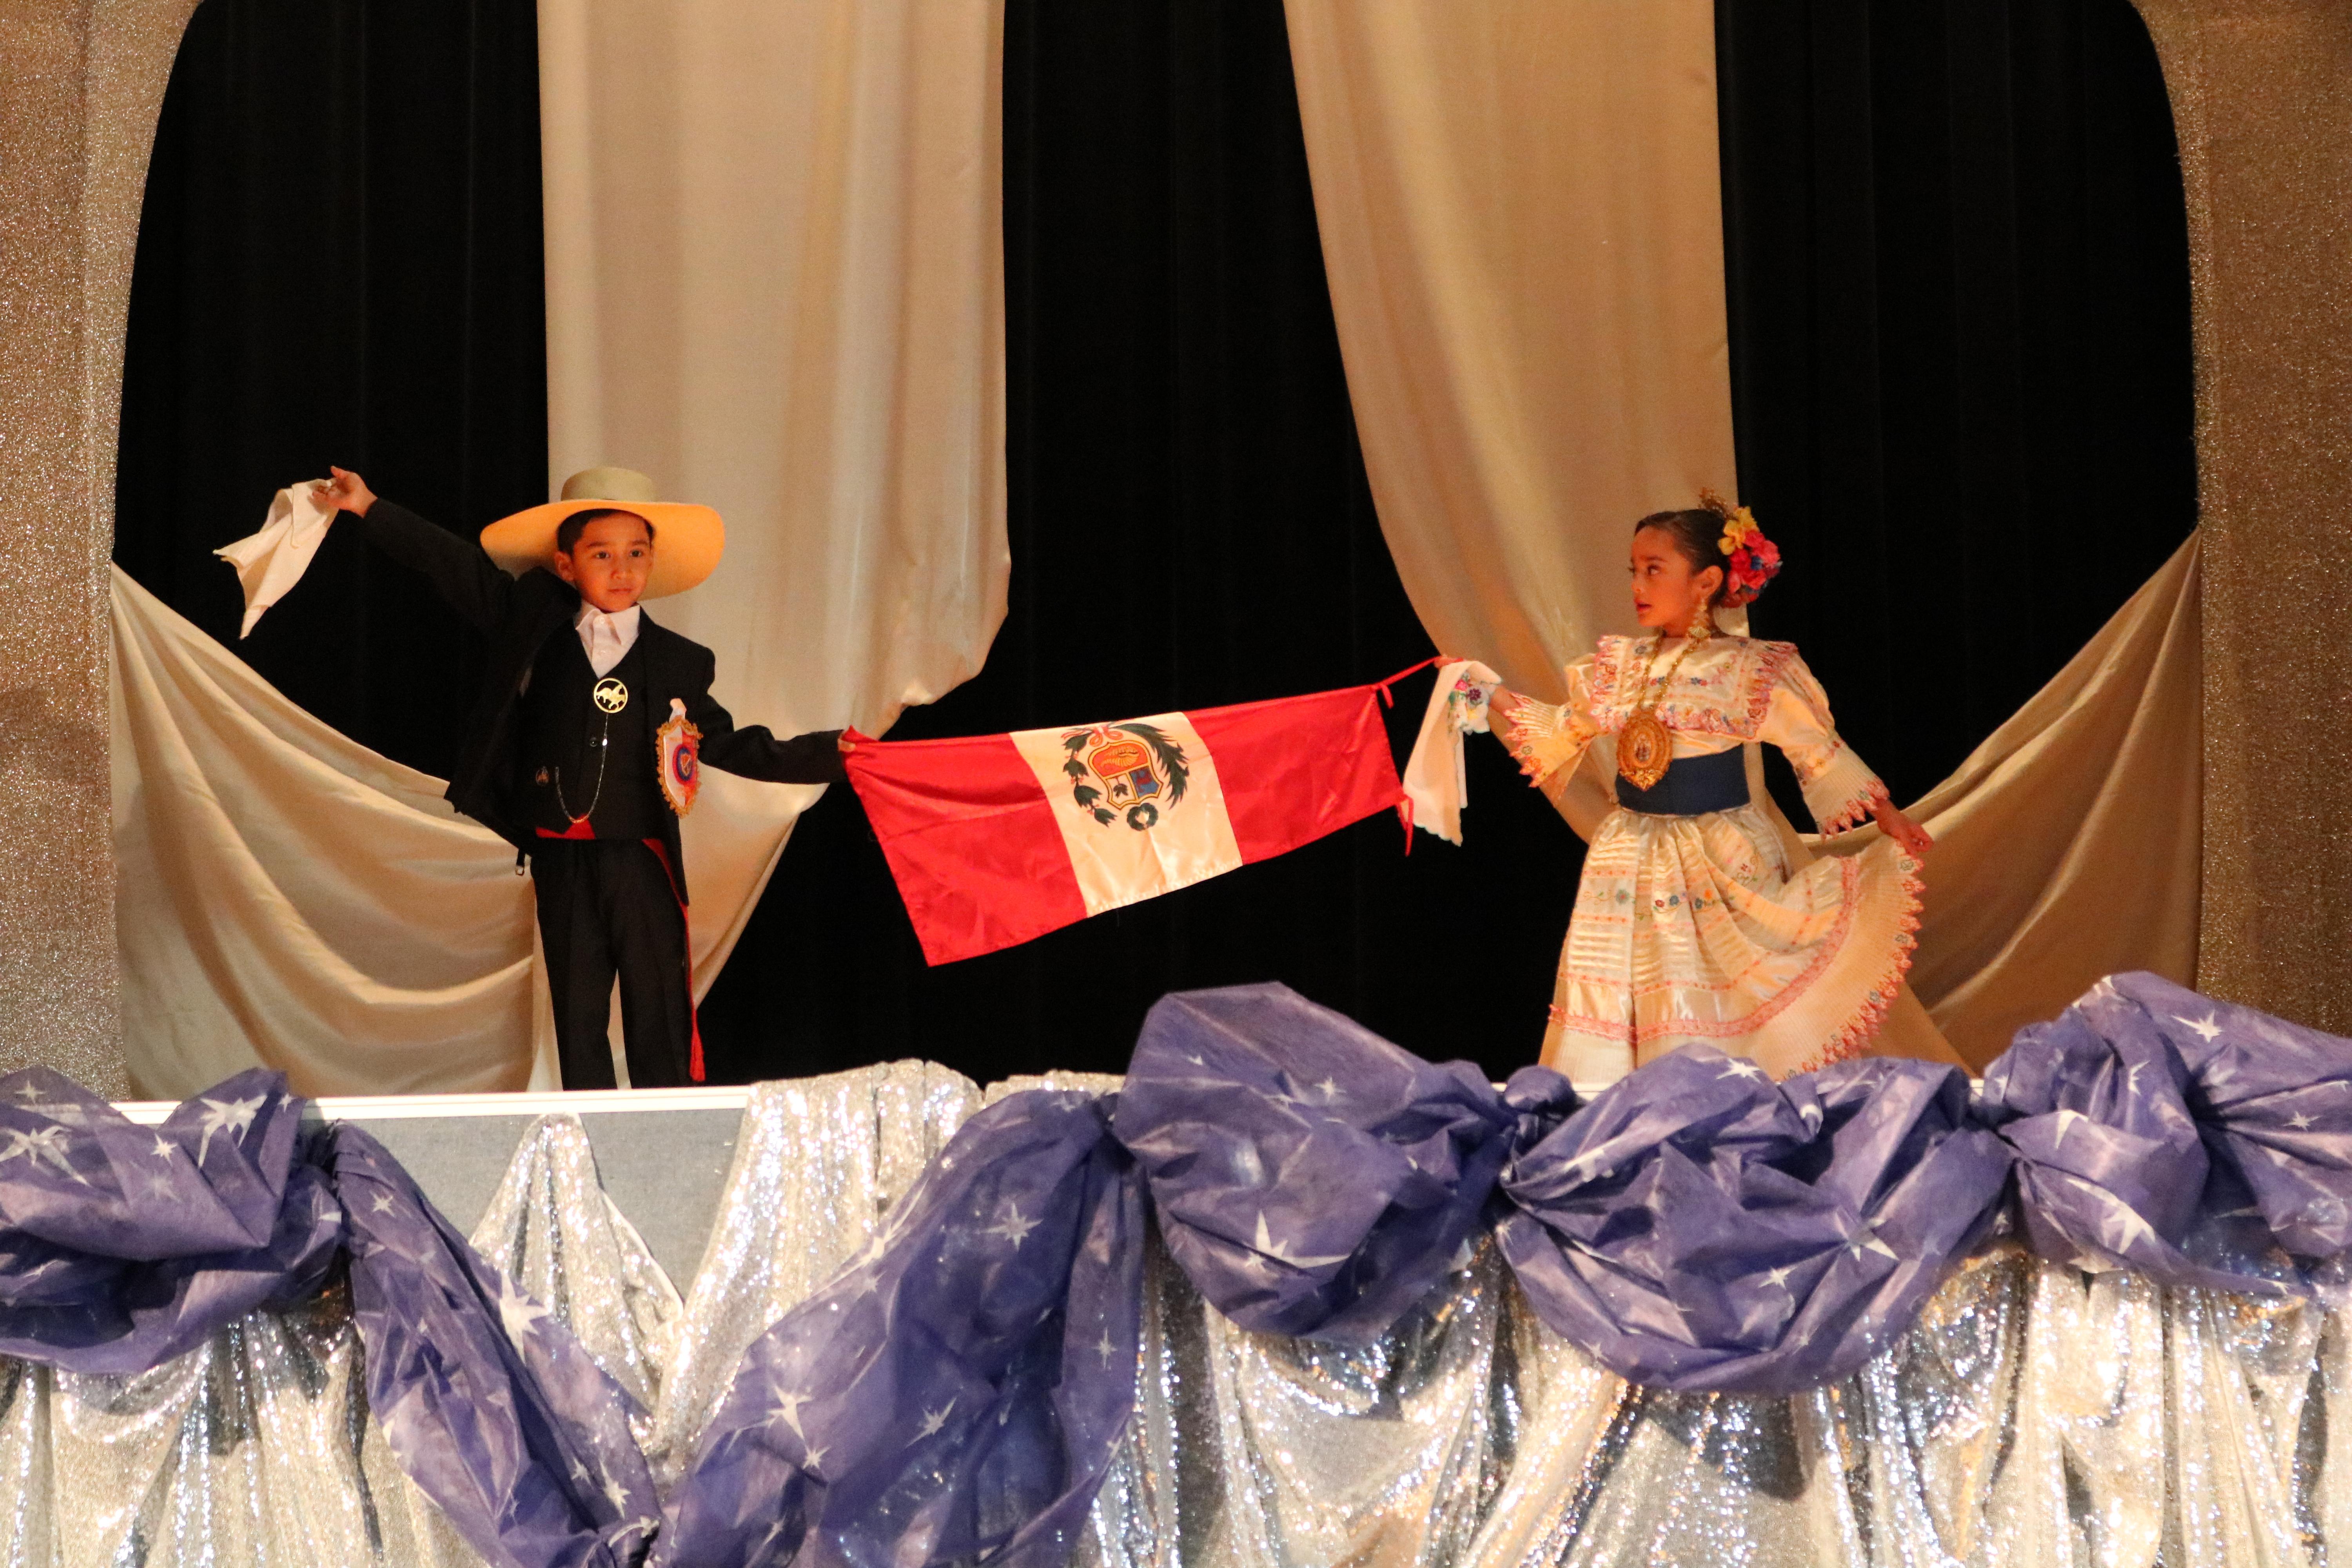 two children dressed in the Peruvian cultural dress holding the Peruvian flag